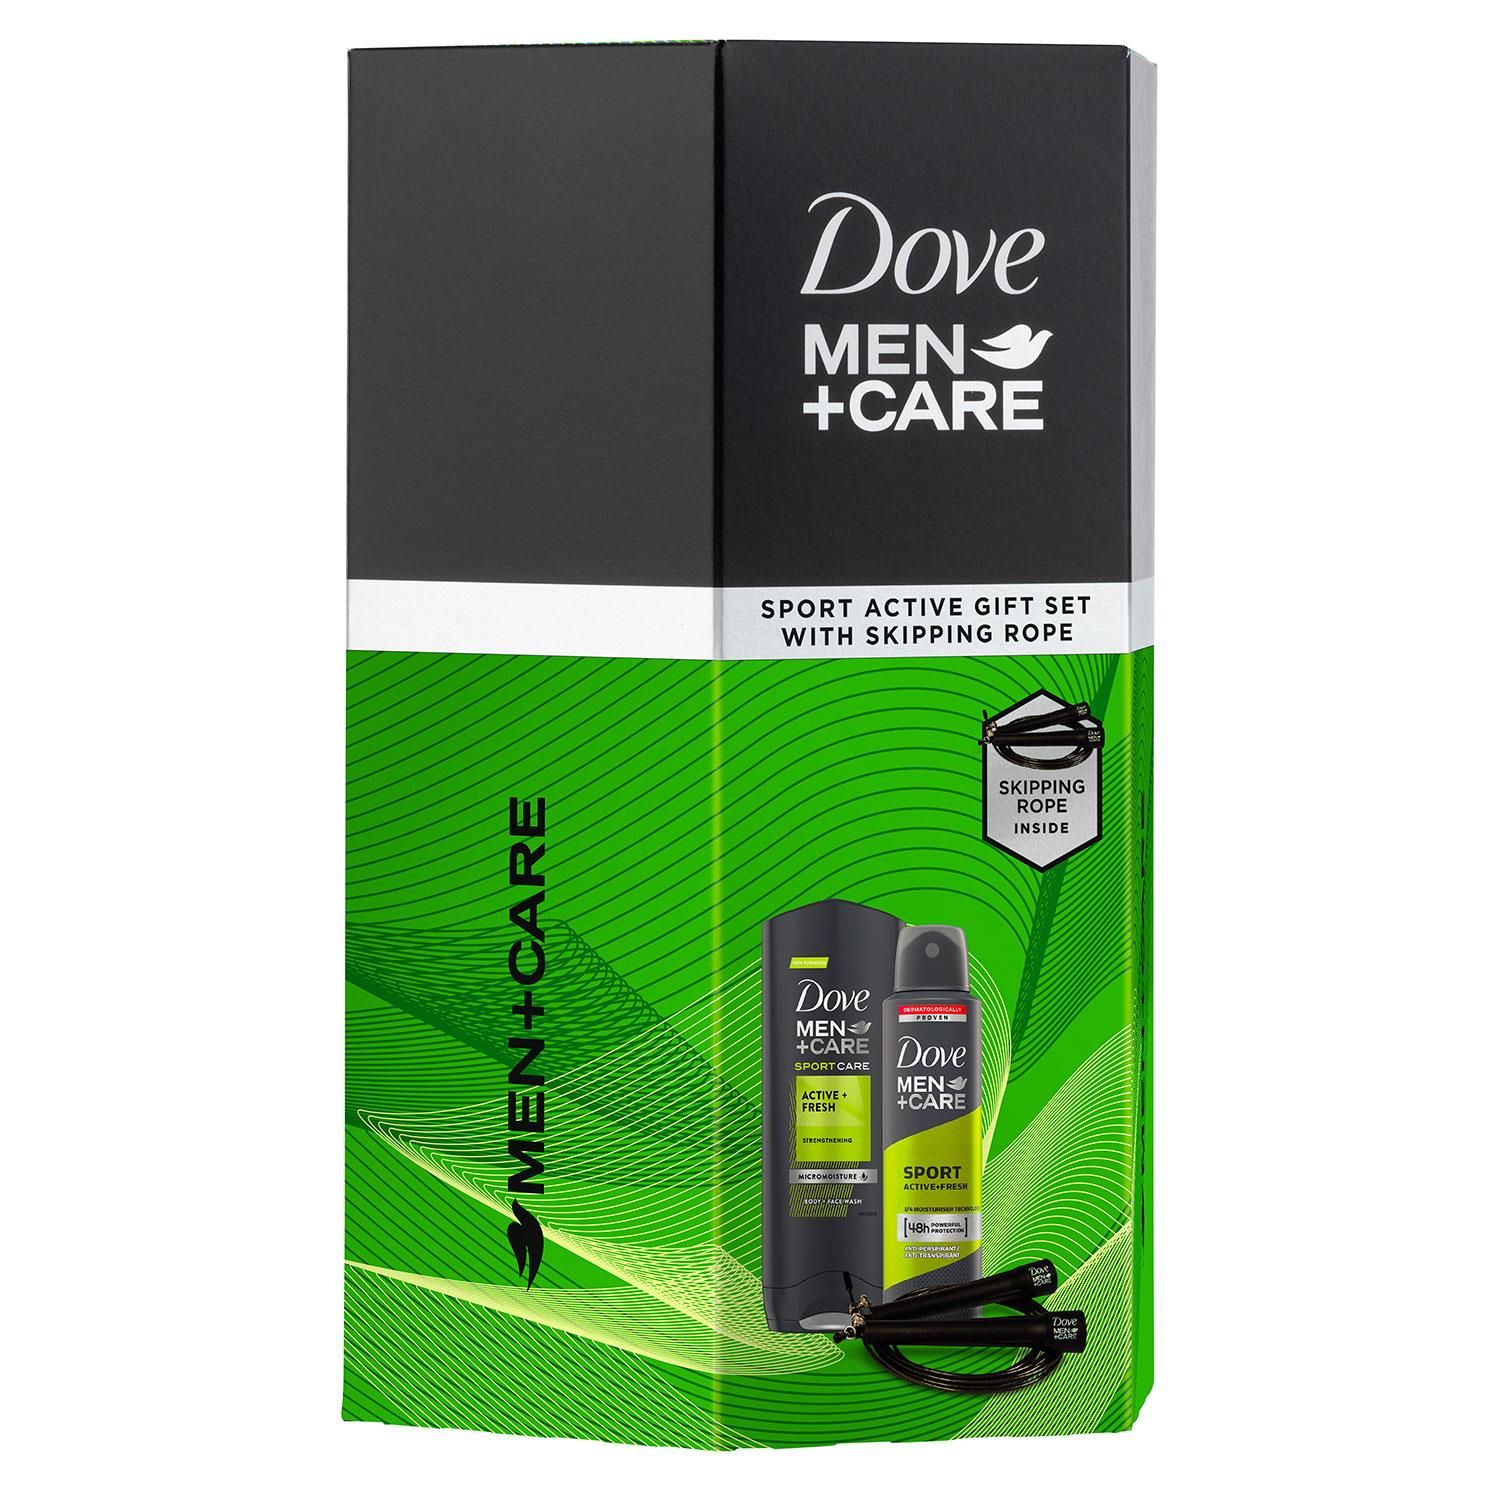 Give him the gift of care with this daily care trio gift set this Christmas. The products are designed specifically for men’s skin after sports. It’s the perfect gift to leave him feeling clean and refreshed. Dove Men + Care celebrates a new definition of strength: one with care at its centre. This gift set was designed with three Dove Men+Care products with Skipping rope to keep his skin feeling fresh and hydrated all day long. Working out is good for your mind and body. 

The best men’s body washes not only leaves you feeling refreshed, but also gives you total skin hydration. All Dove Men+Care Body Wash 250ml for men contain Micromoisture which activates on the skin and helps fight the drying out of the skin after showering. Powering out really during sports is good for the body and mind. But did you know that sports can also irritate your skin  Sweat, the friction generated by movements, frequent showering and even drying with the towel stress your skin and can lead to dry skin feeling, irritation and irritation. The Dove Men+Care Deodorant Spray 150 ml Sport Active Fresh + Antiperspirant is specially developed for the care of men's skin - even after sports.

Features:
For freshness before and after sport
Contains ¼ care cream to protect against skin irritations
Sport deodorant spray for men
Effective against sweat, gentle on the skin

Safety Warning:
Body Spray: Stop use if rash or irritation occurs. Avoid direct inhalation. Use in short bursts in well-ventilated places, avoid prolonged spraying. Do not spray near your eyes. Use only as directed. 
Body Wash: Use only as directed. Avoid contact with eyes. If eye contact occurs wash out immediately with warm water. If irritation occurs discontinue use.

Gift Set Includes:
1x Dove M+C Sports Active Body Wash 250ml
1x Dove M+C Sports Active Antiperspirant 150ml with Skipping Rope